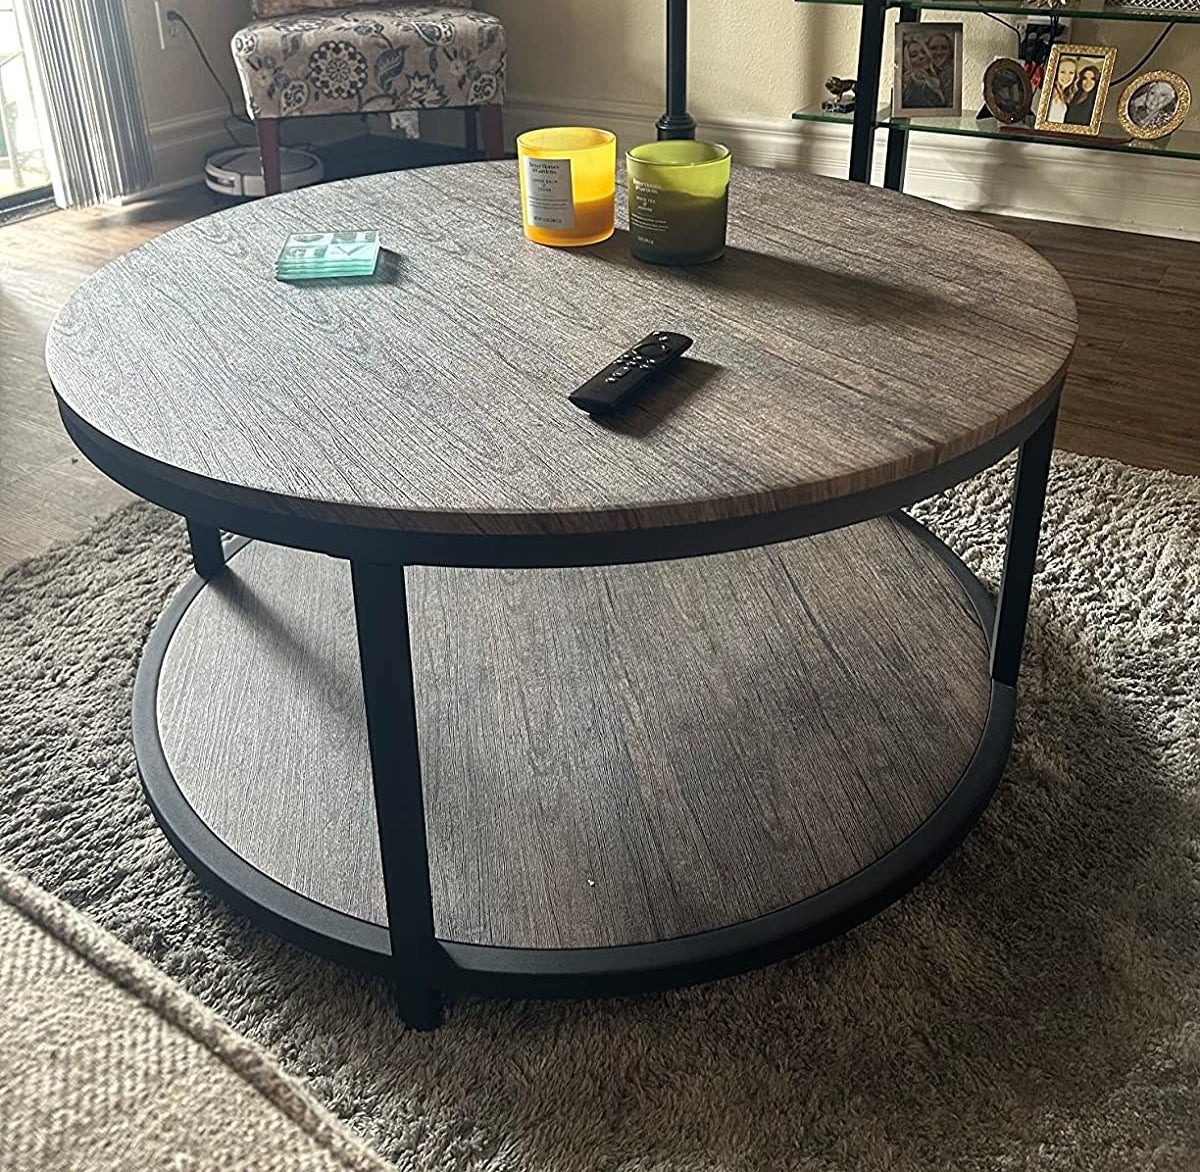 A reviewer&#x27;s photo of the round coffee table